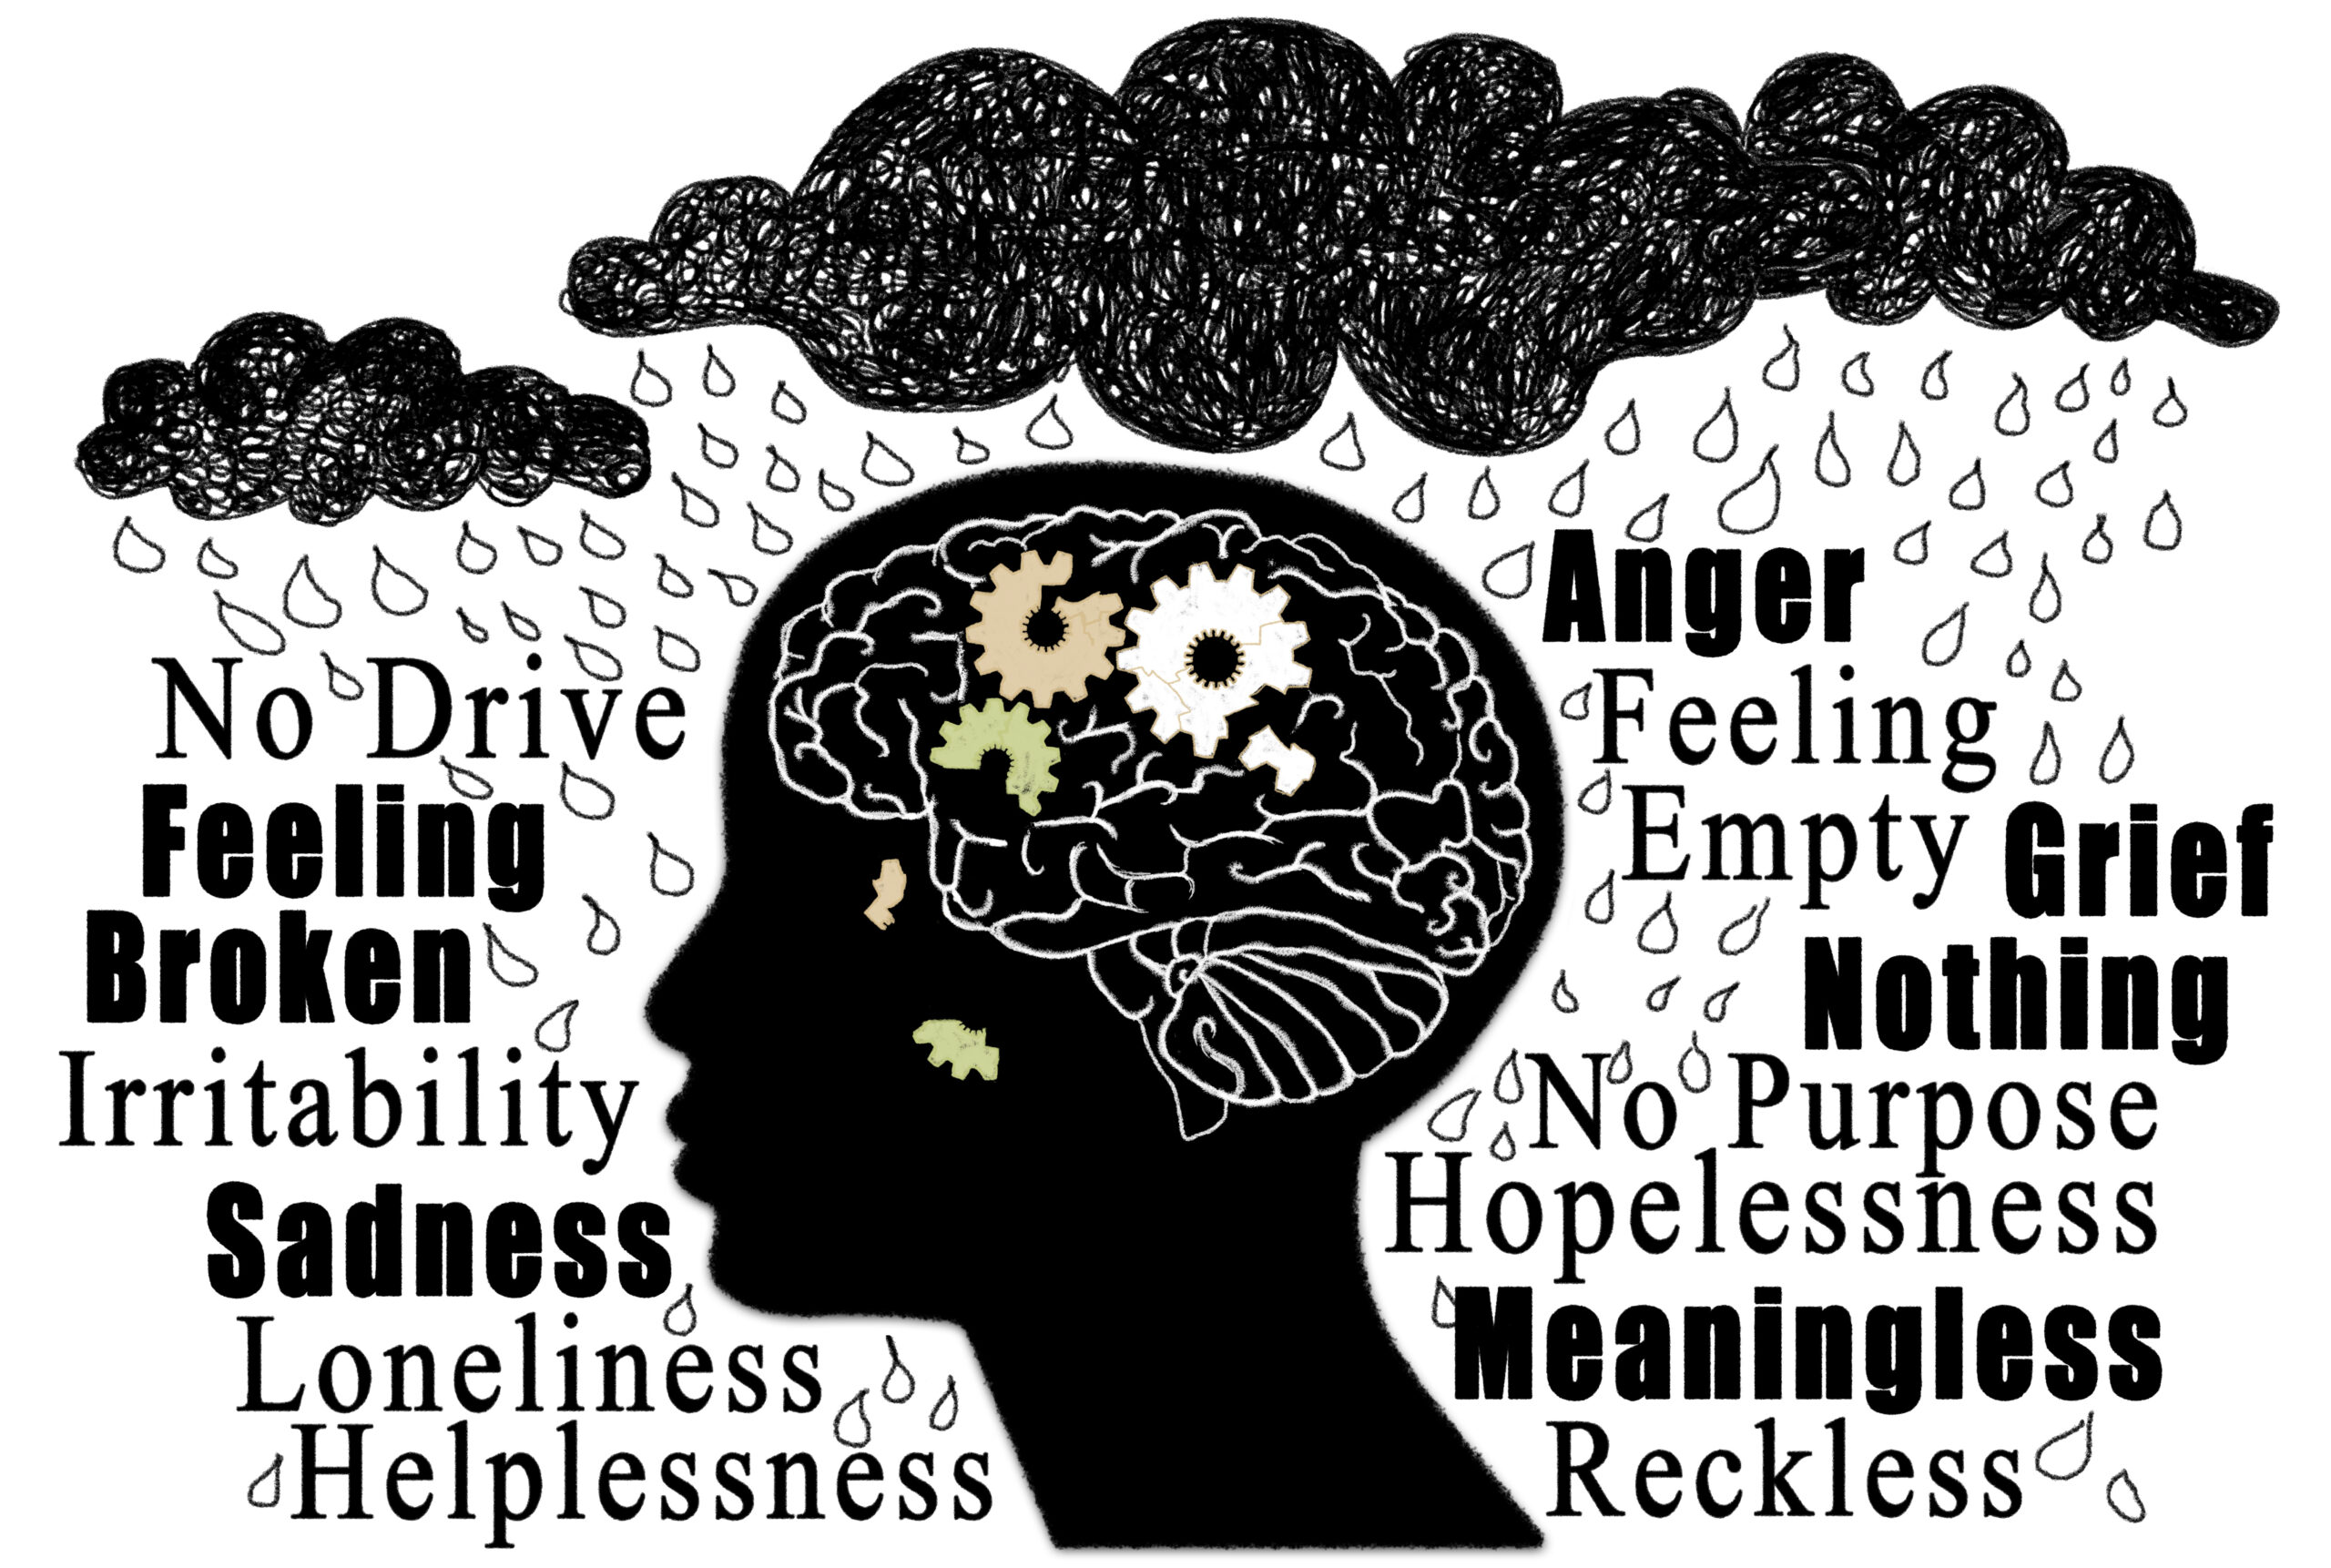 Illustration showing a person's brain surrounded by black clouds and rain drops and listing symptoms of depression